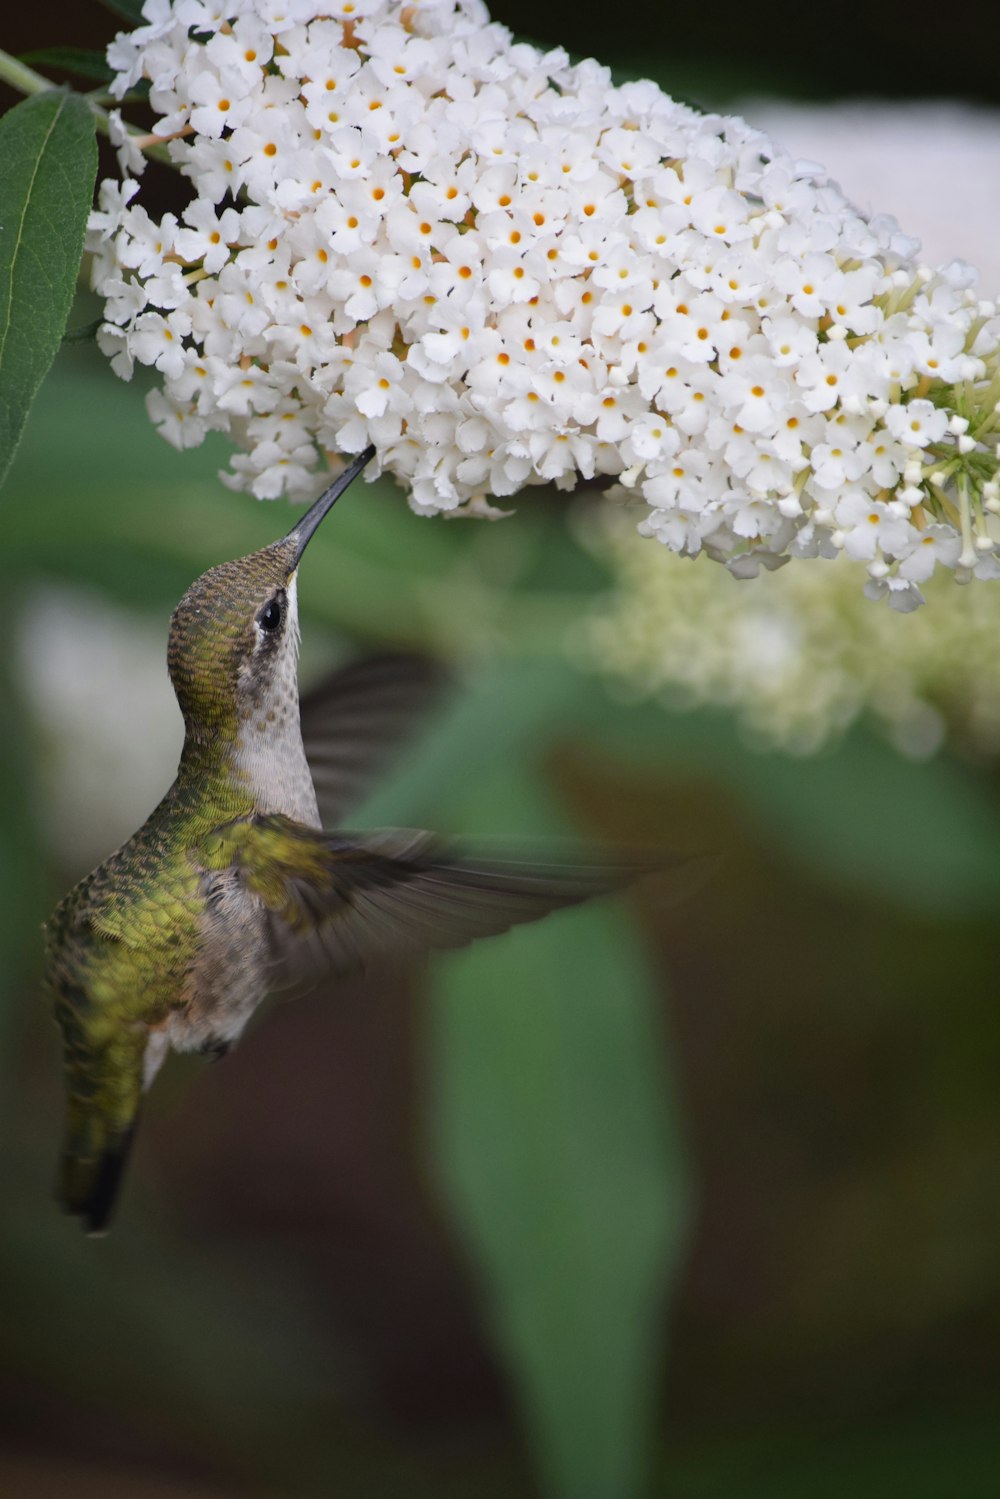 green and gray humming bird flying near white flowers